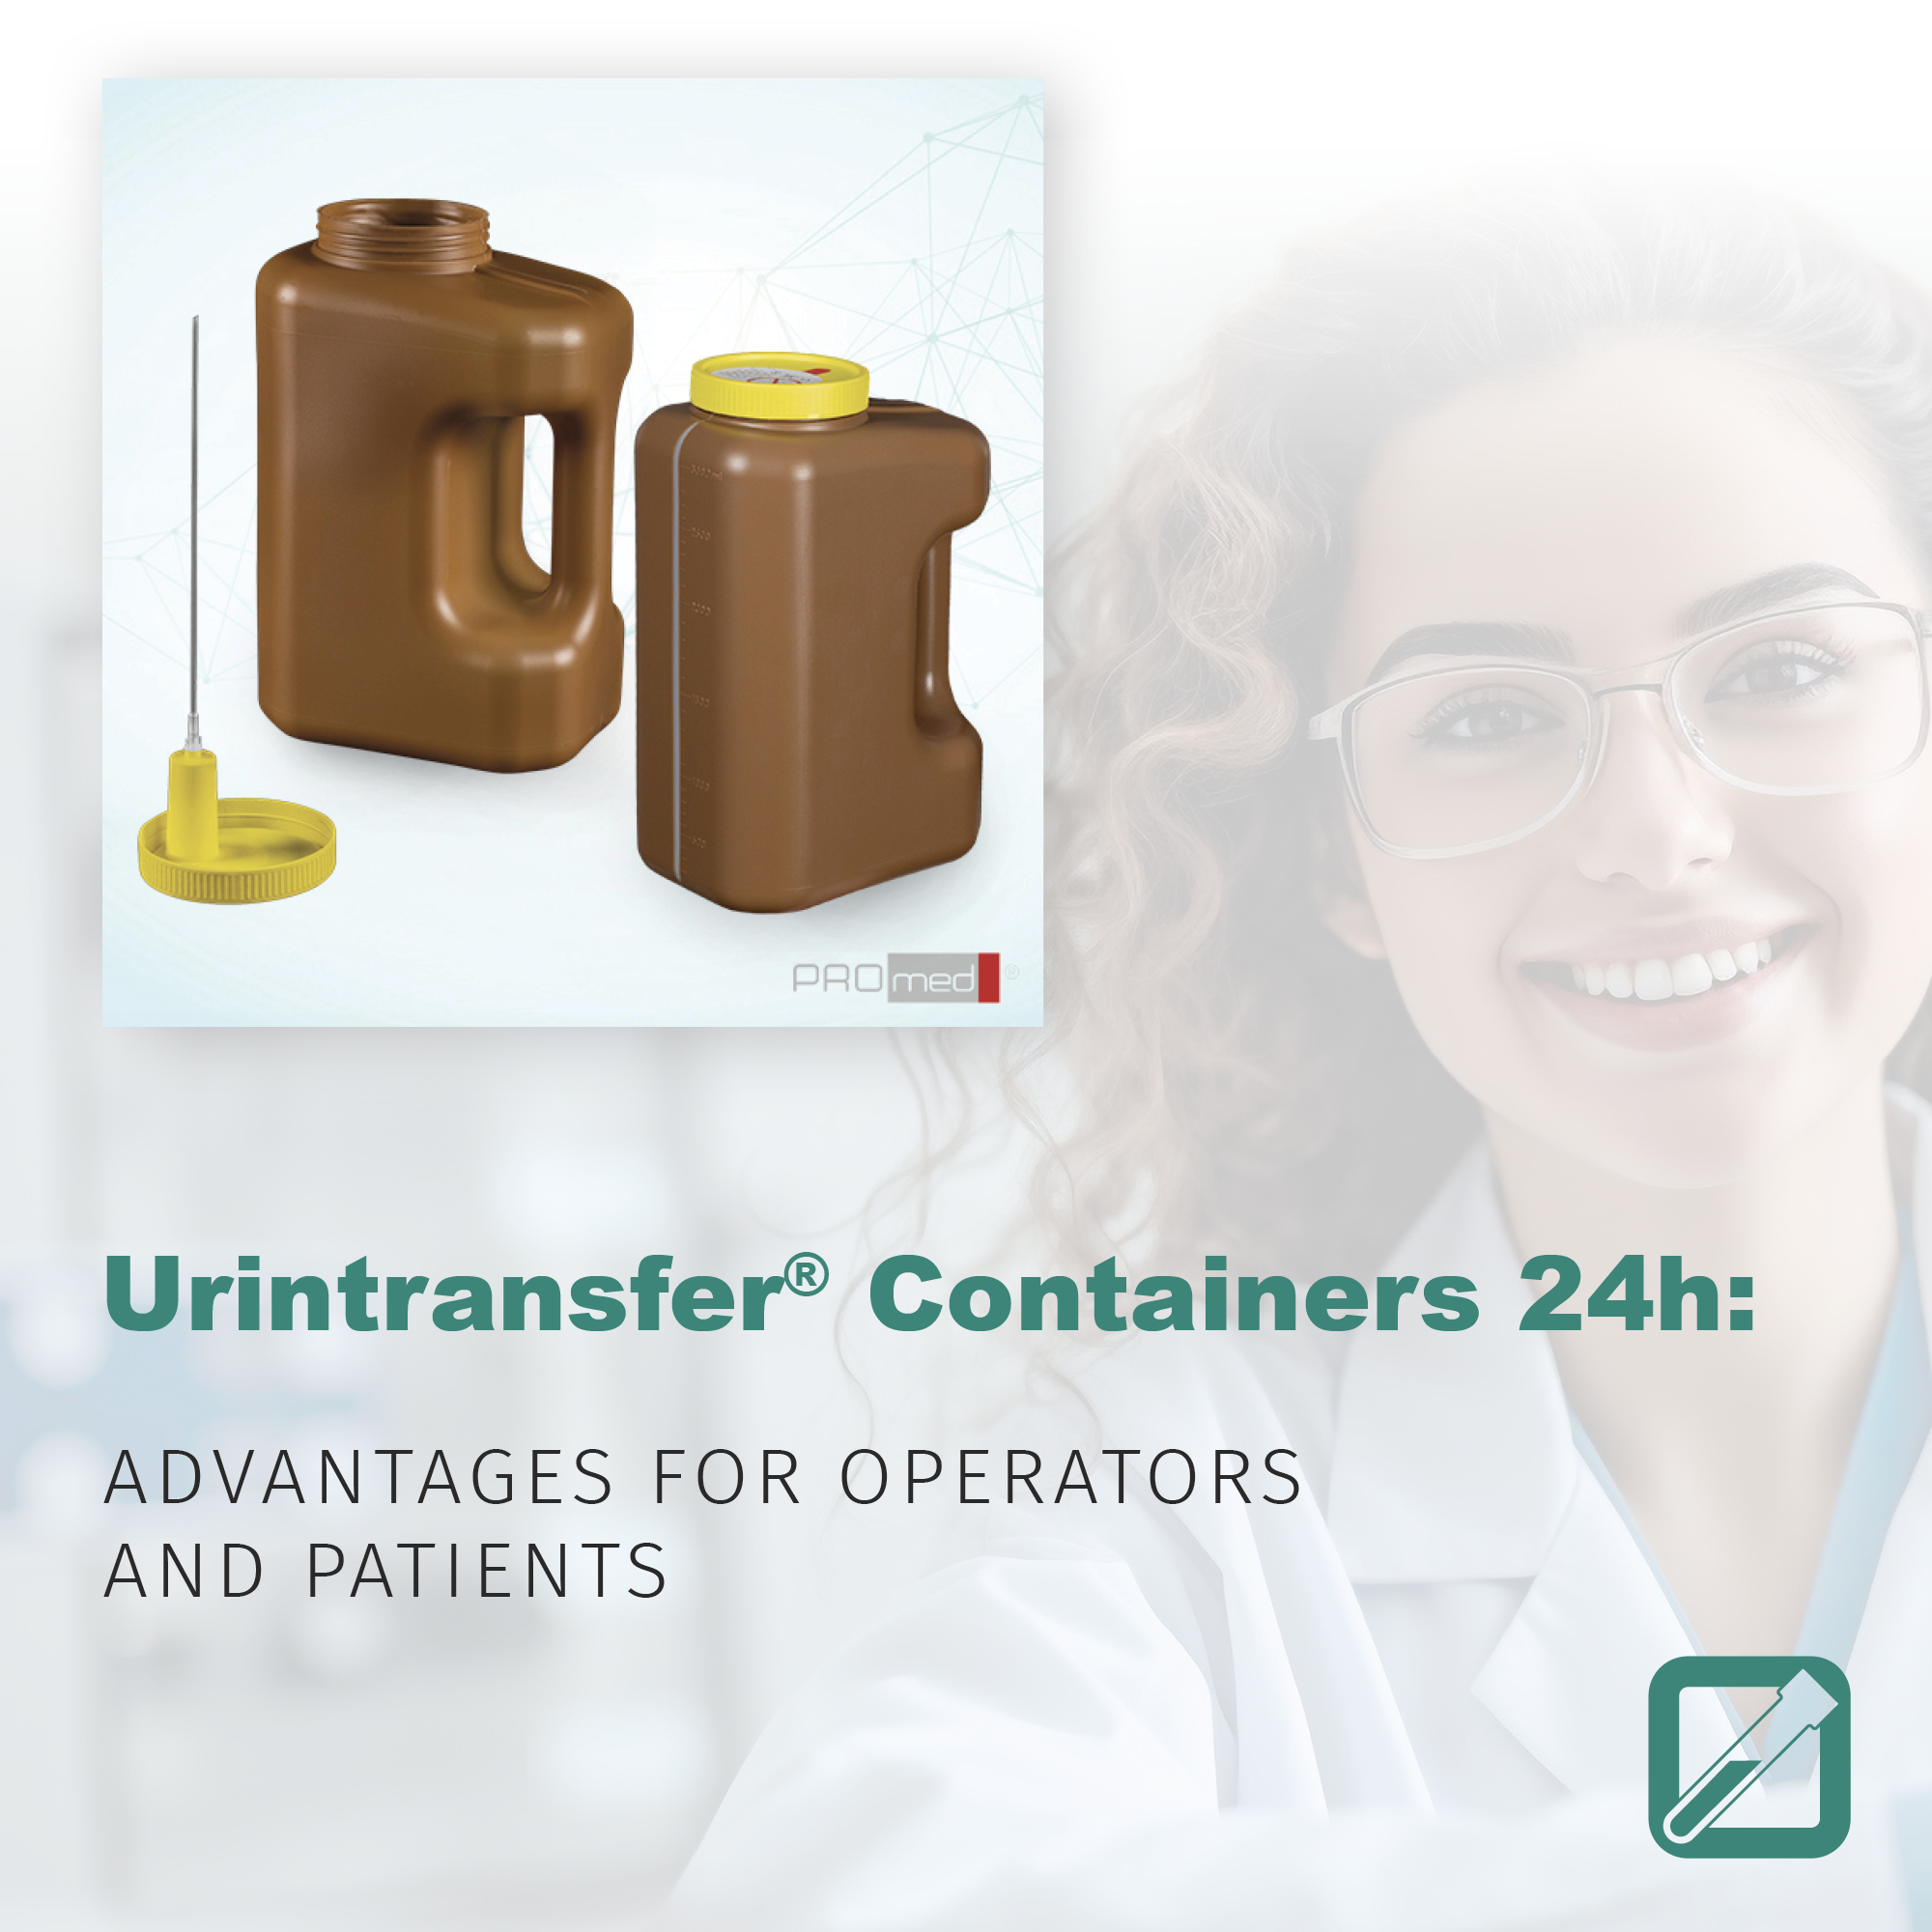 Urintransfer® Containers 24h: advantages for operators and patients